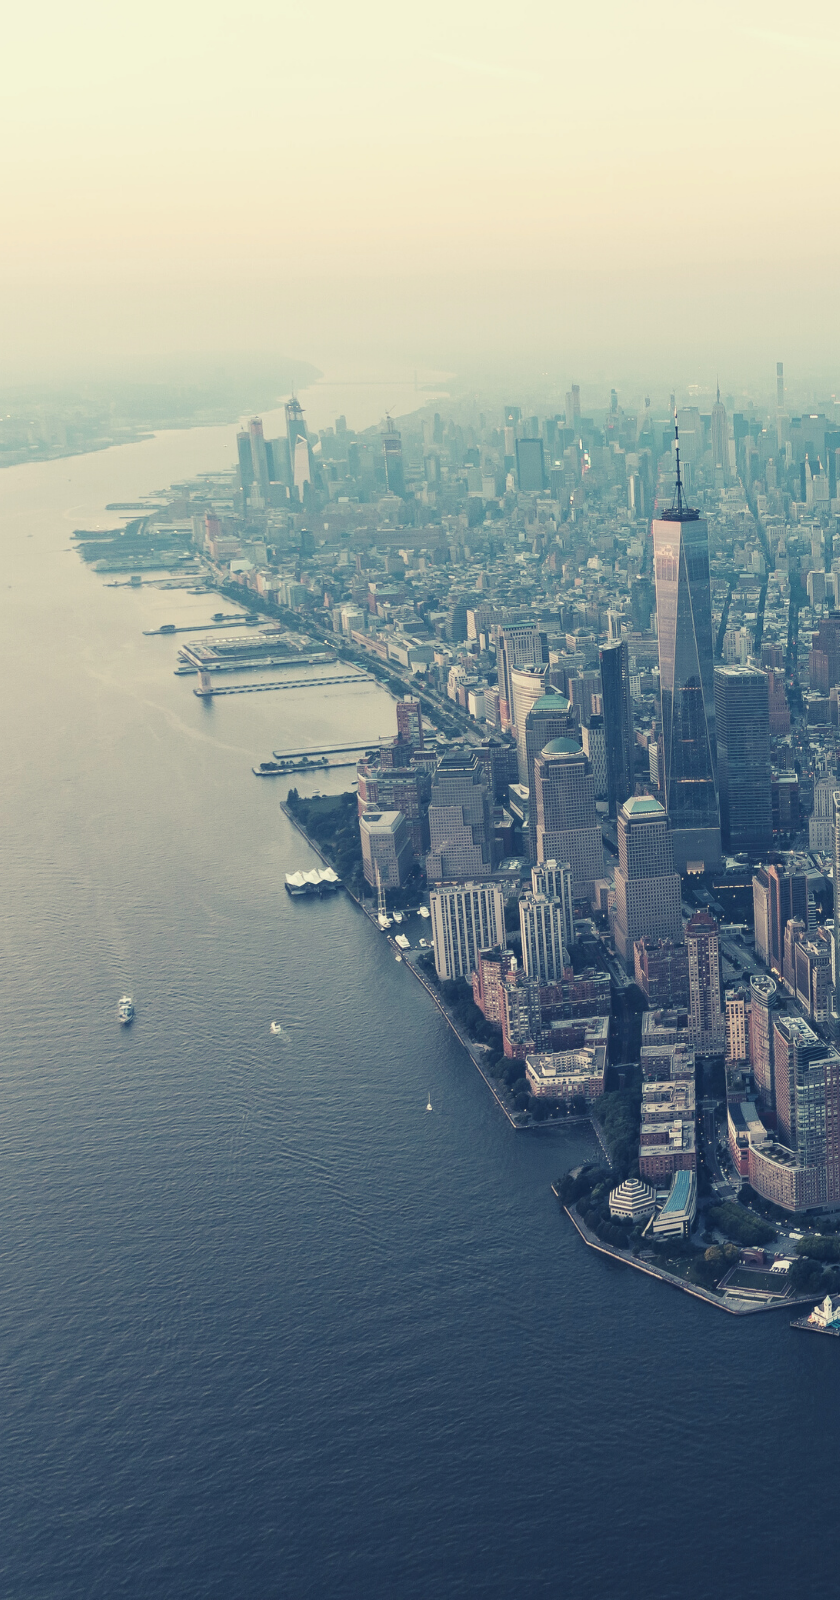 The best New York City wallpaper to download free for iPhone. City wallpaper, City tumblr, Central park view